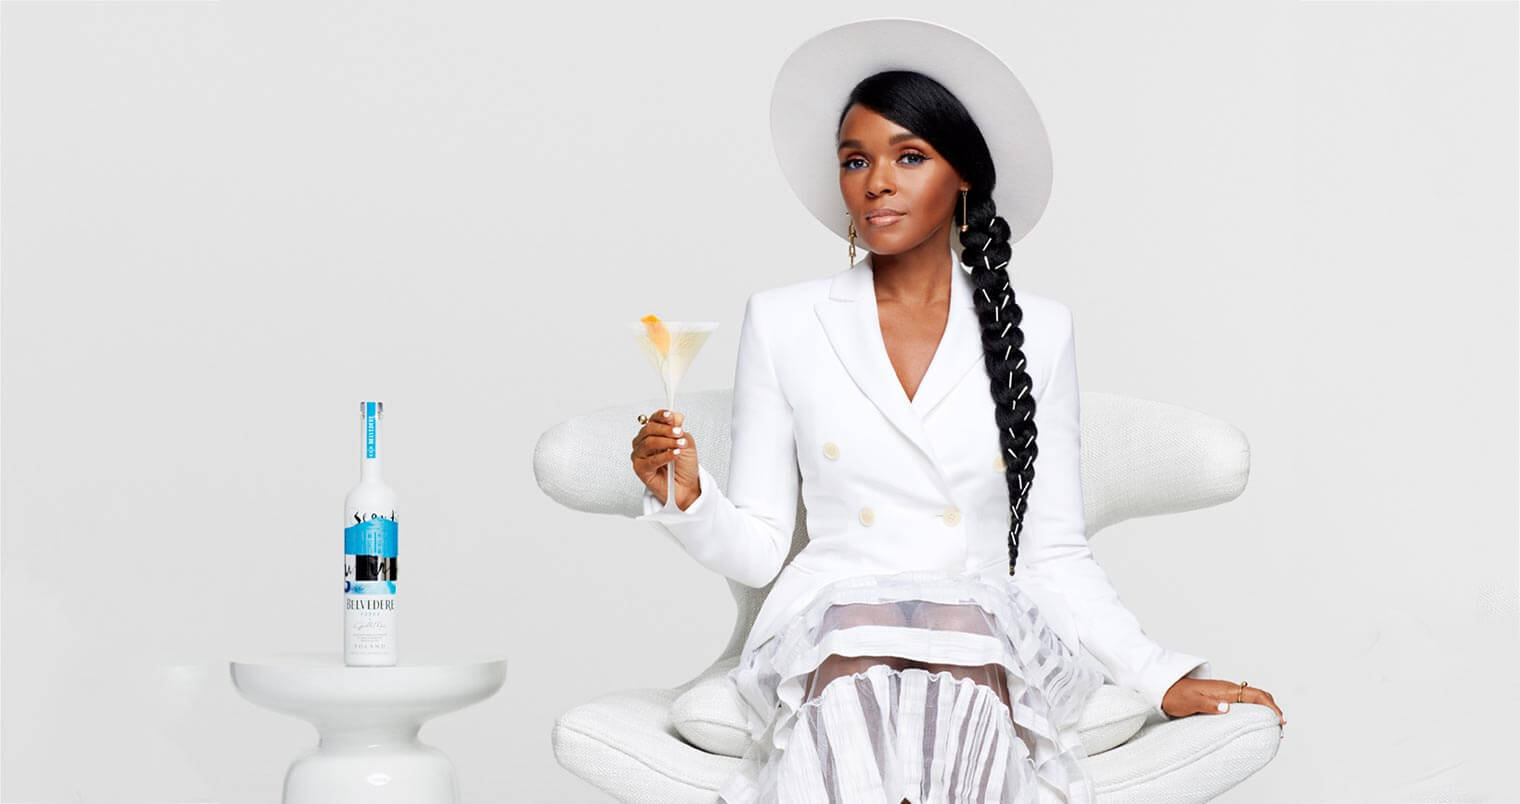 Belvedere "A Beautiful Future" with Janelle Monáe, featured image